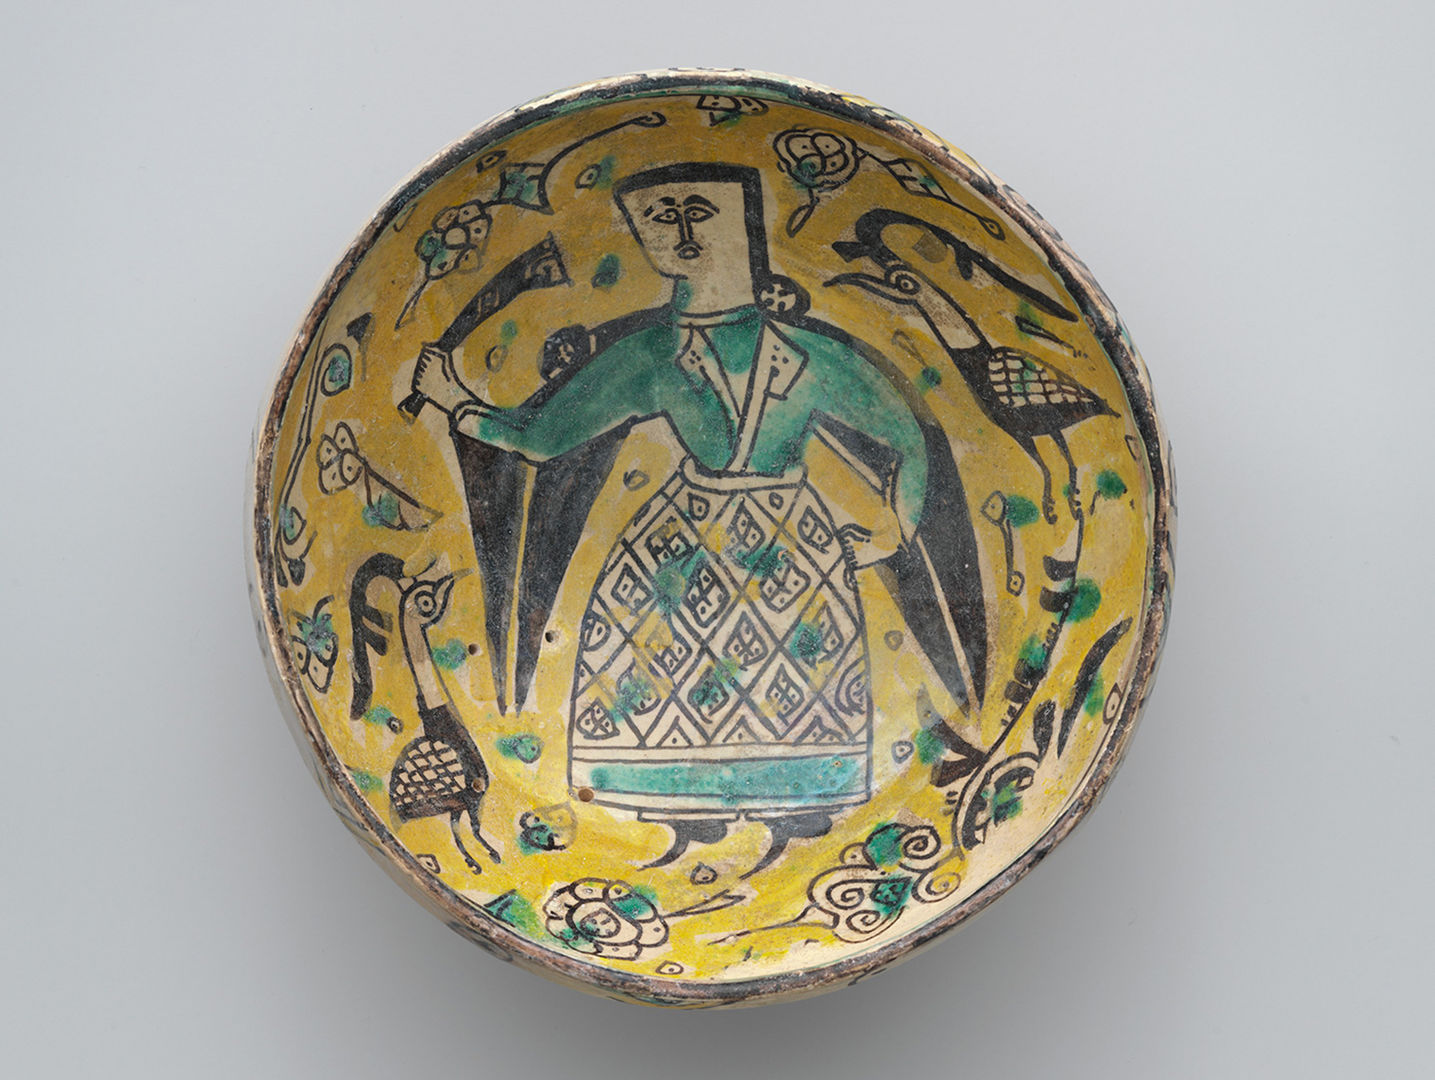 Yellow earthenware bowl with figure and birds decorating the surface